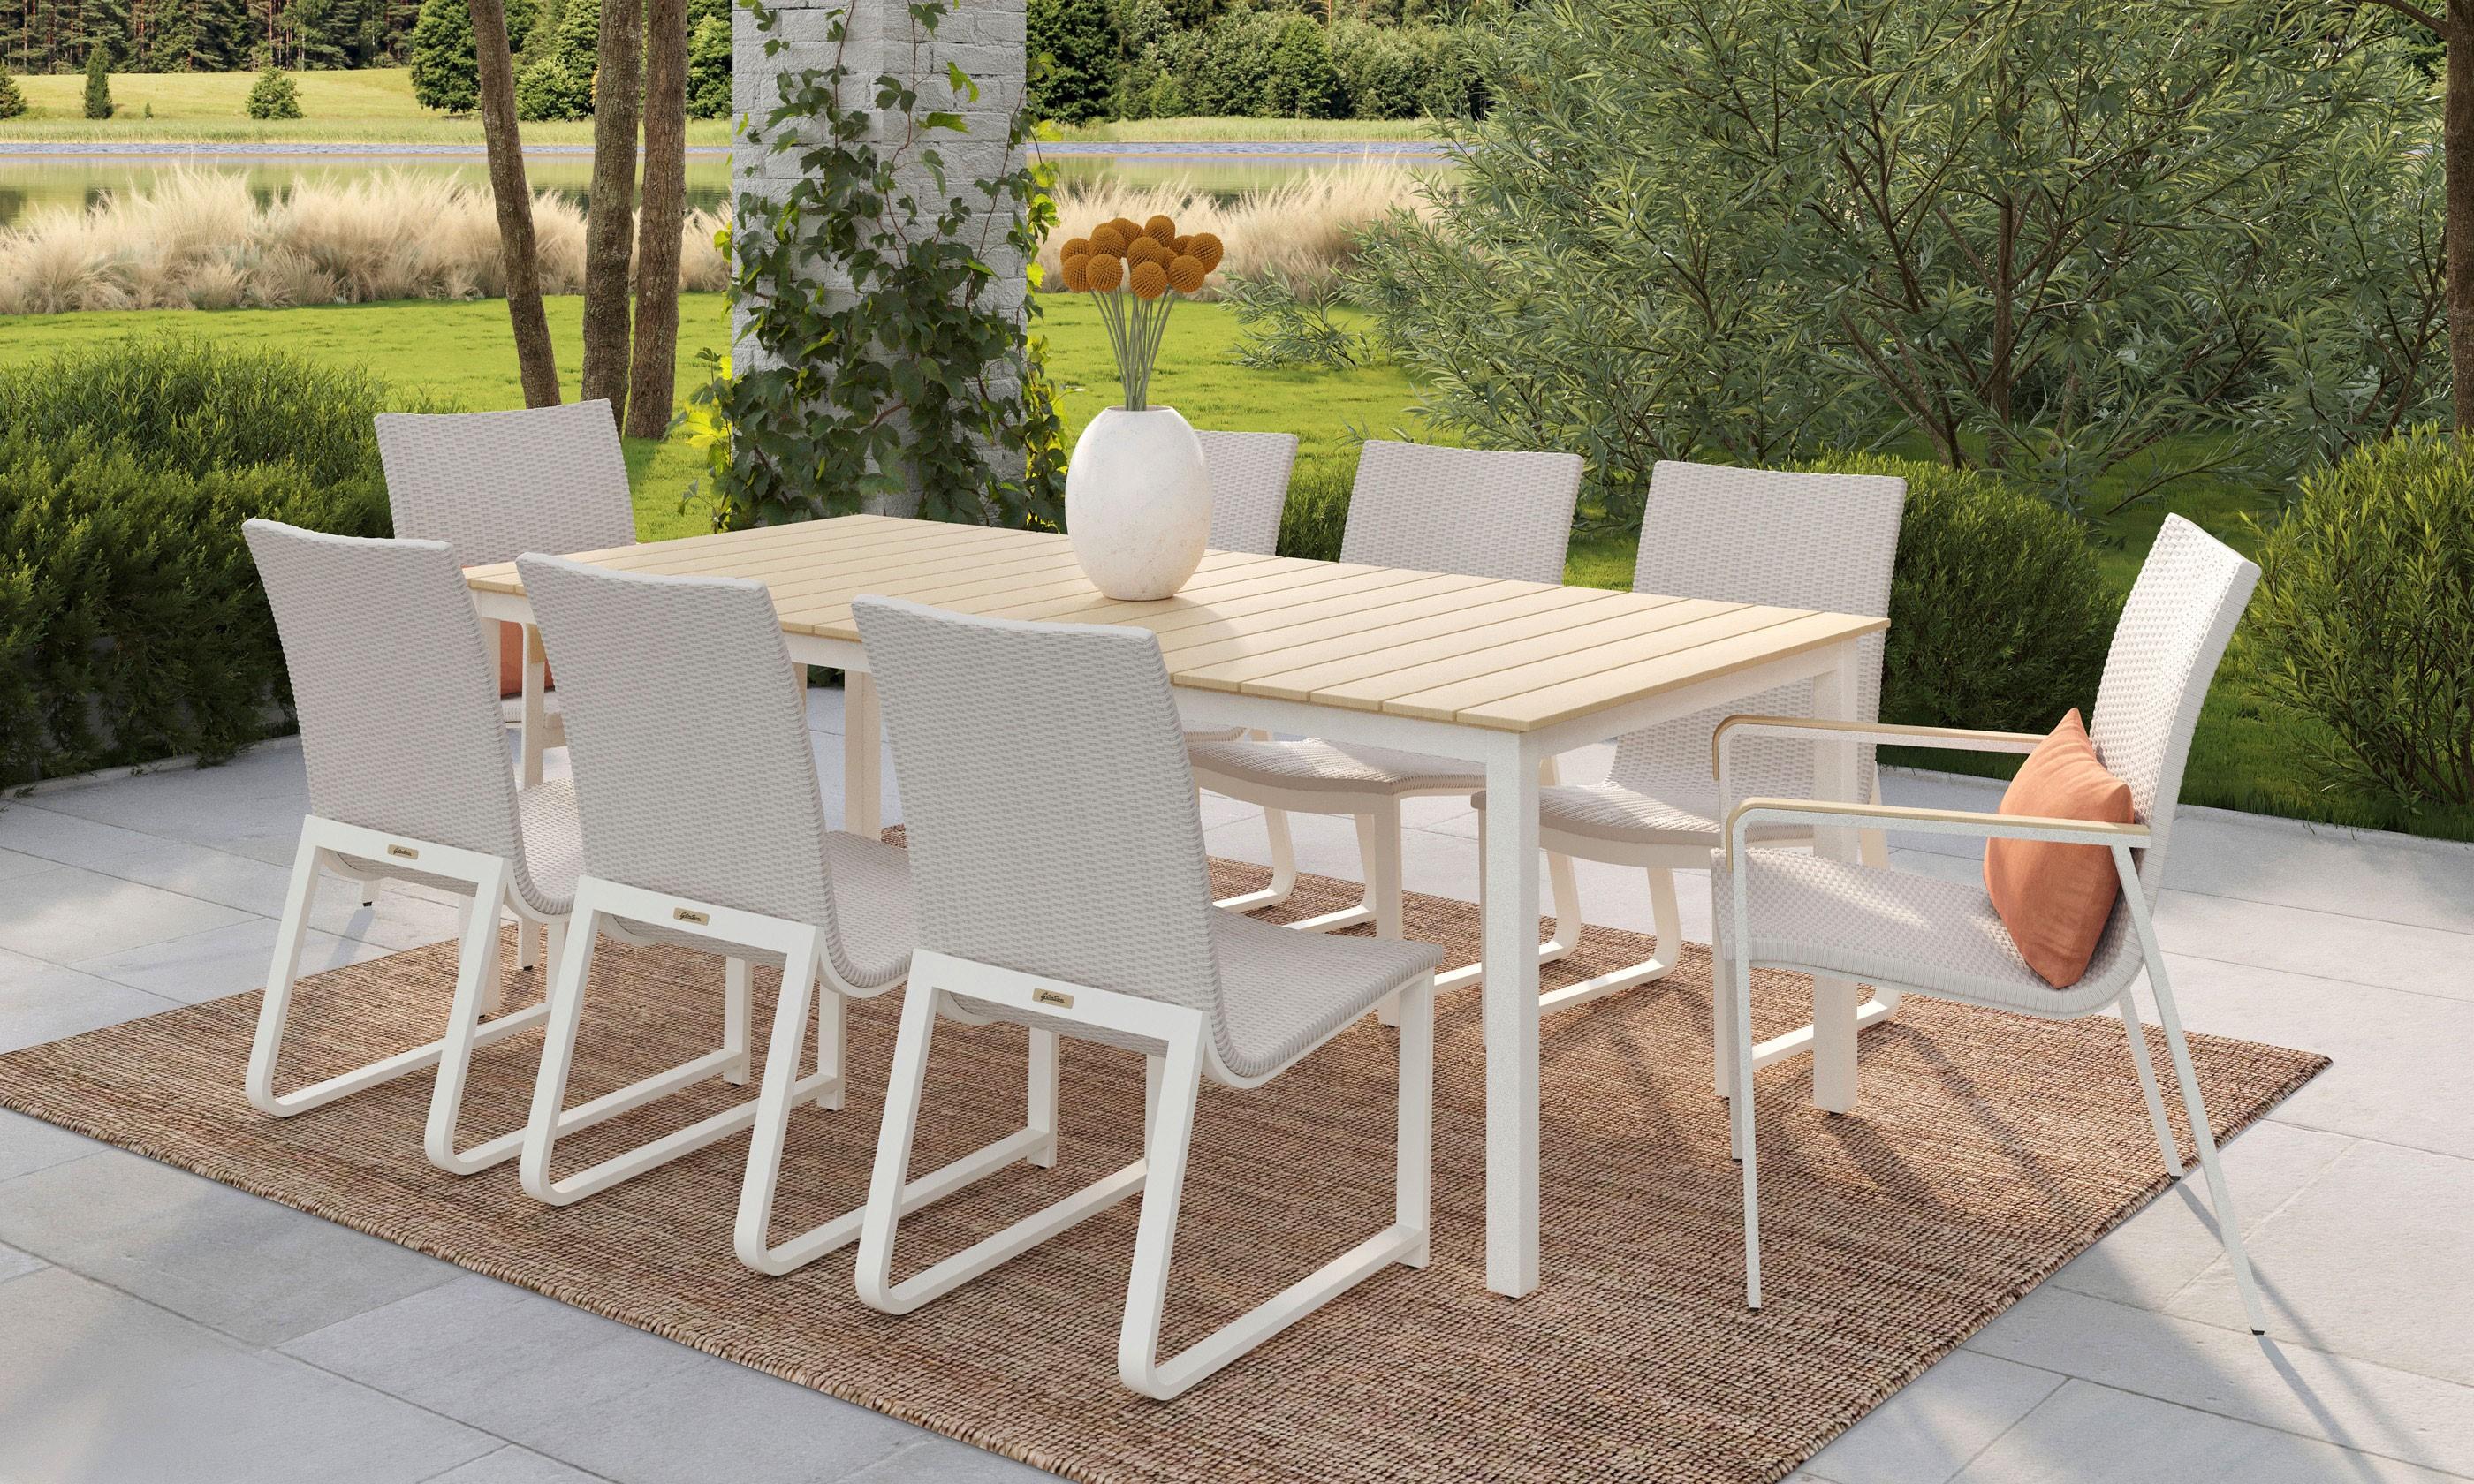 New Gensun Casual Living Ventura nine piece cast aluminum and woven dining table and chairs. Ventura is a streamlined transitional design with a unique use of materials. The collection features a natural look synthetic wicker hand woven onto a